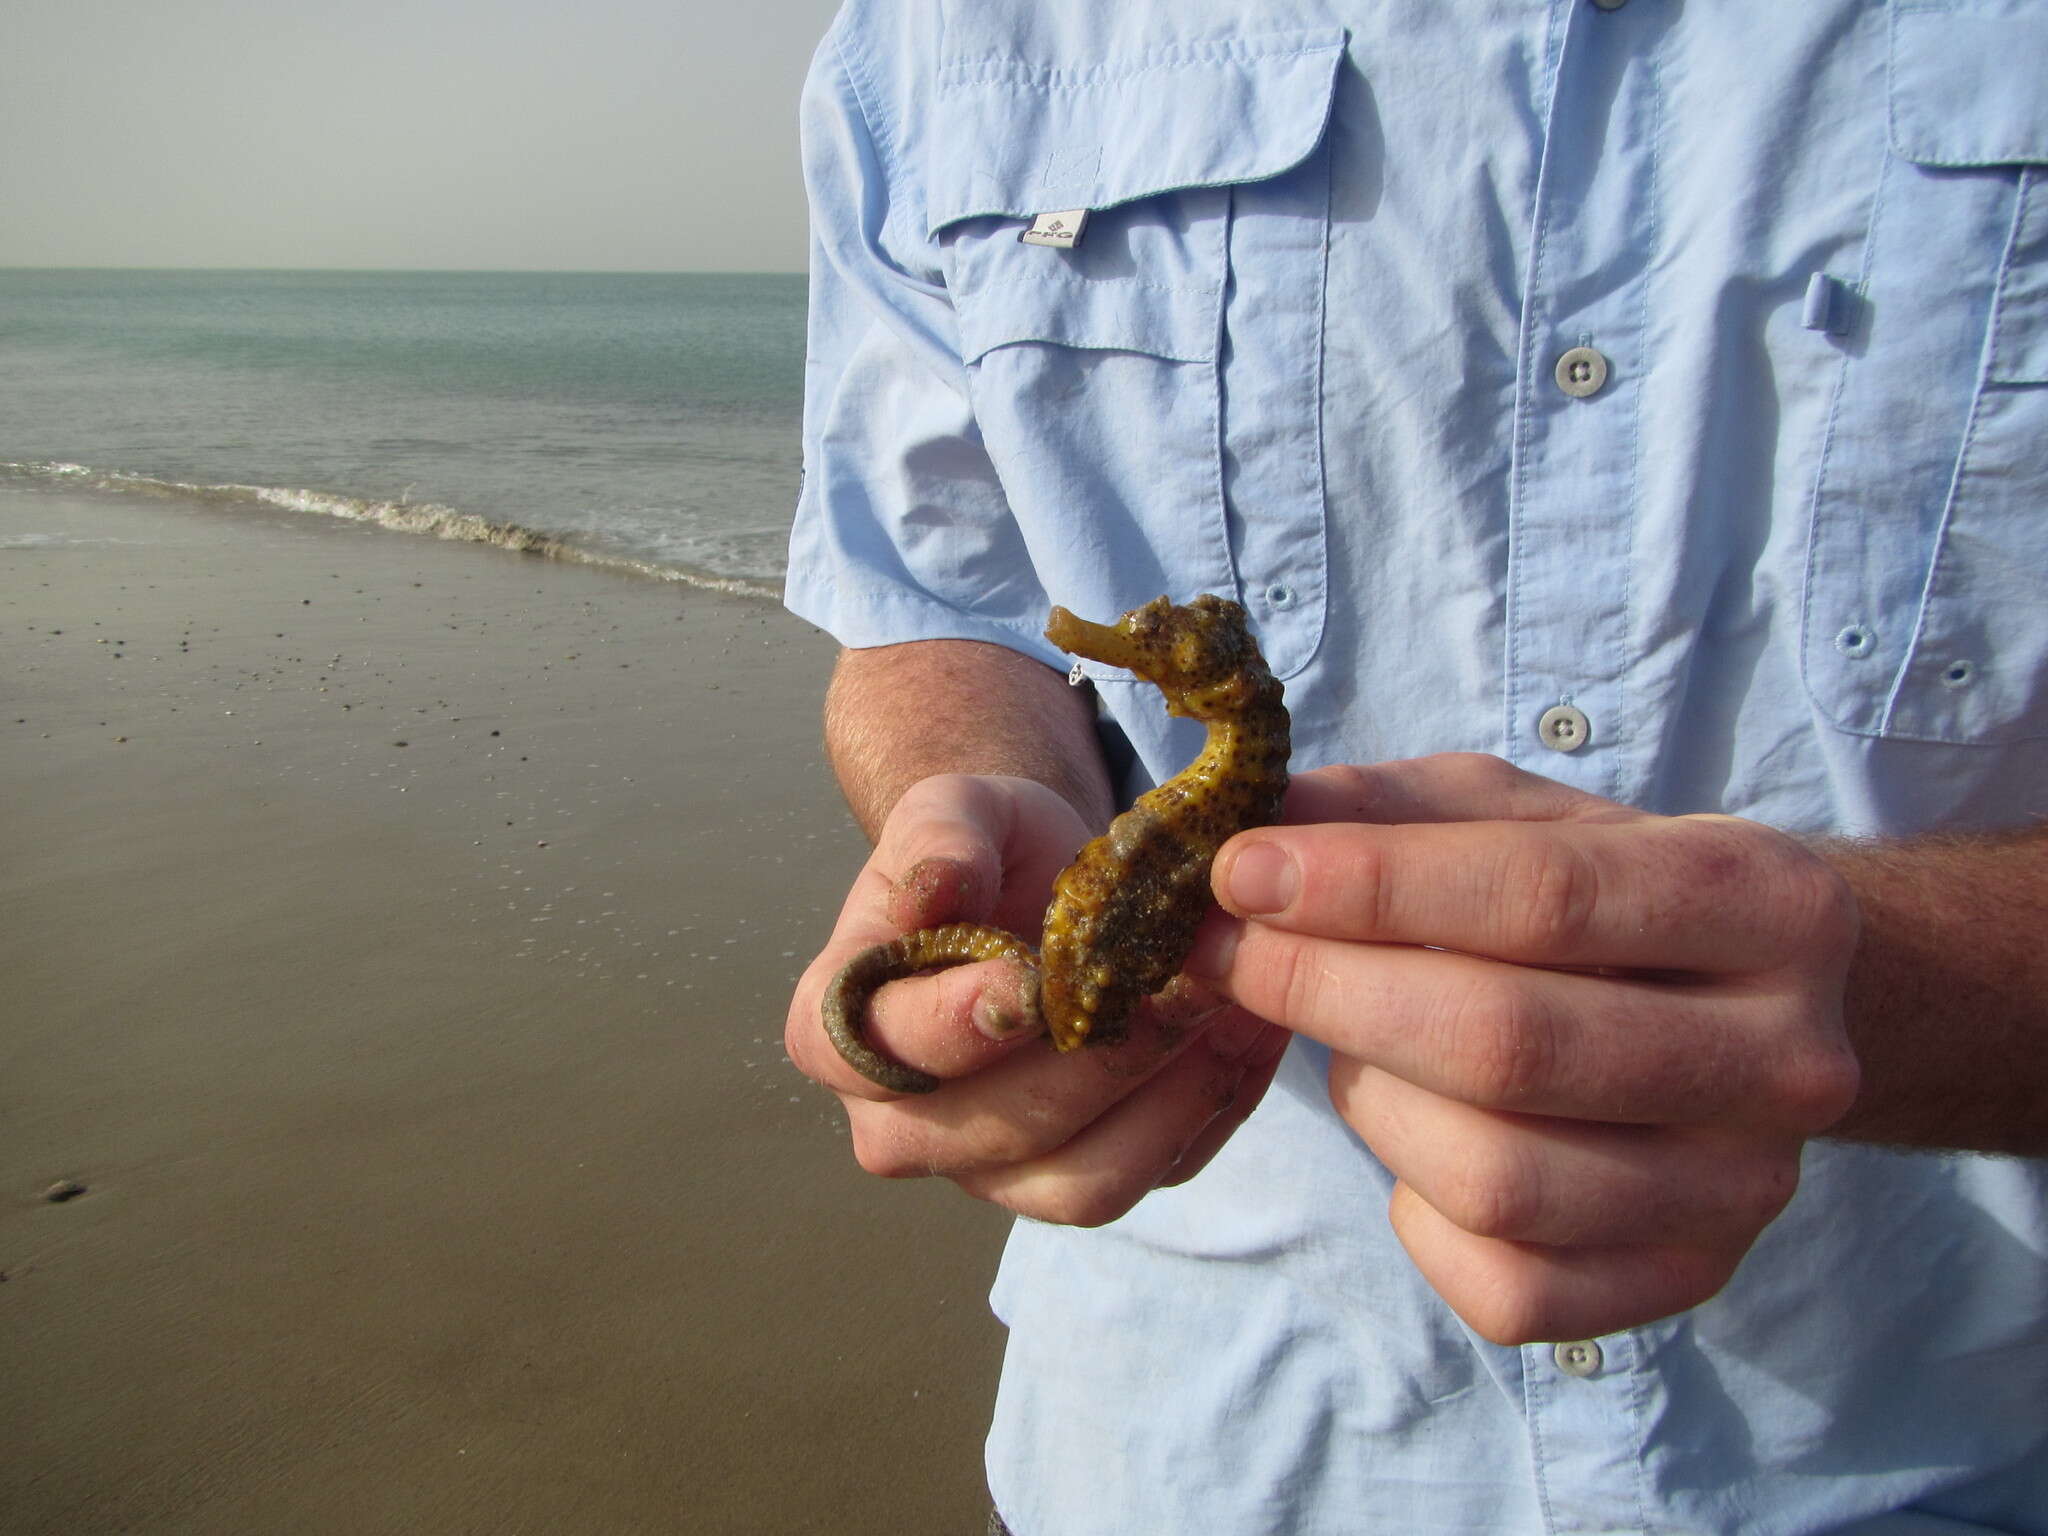 Image of West African Seahorse